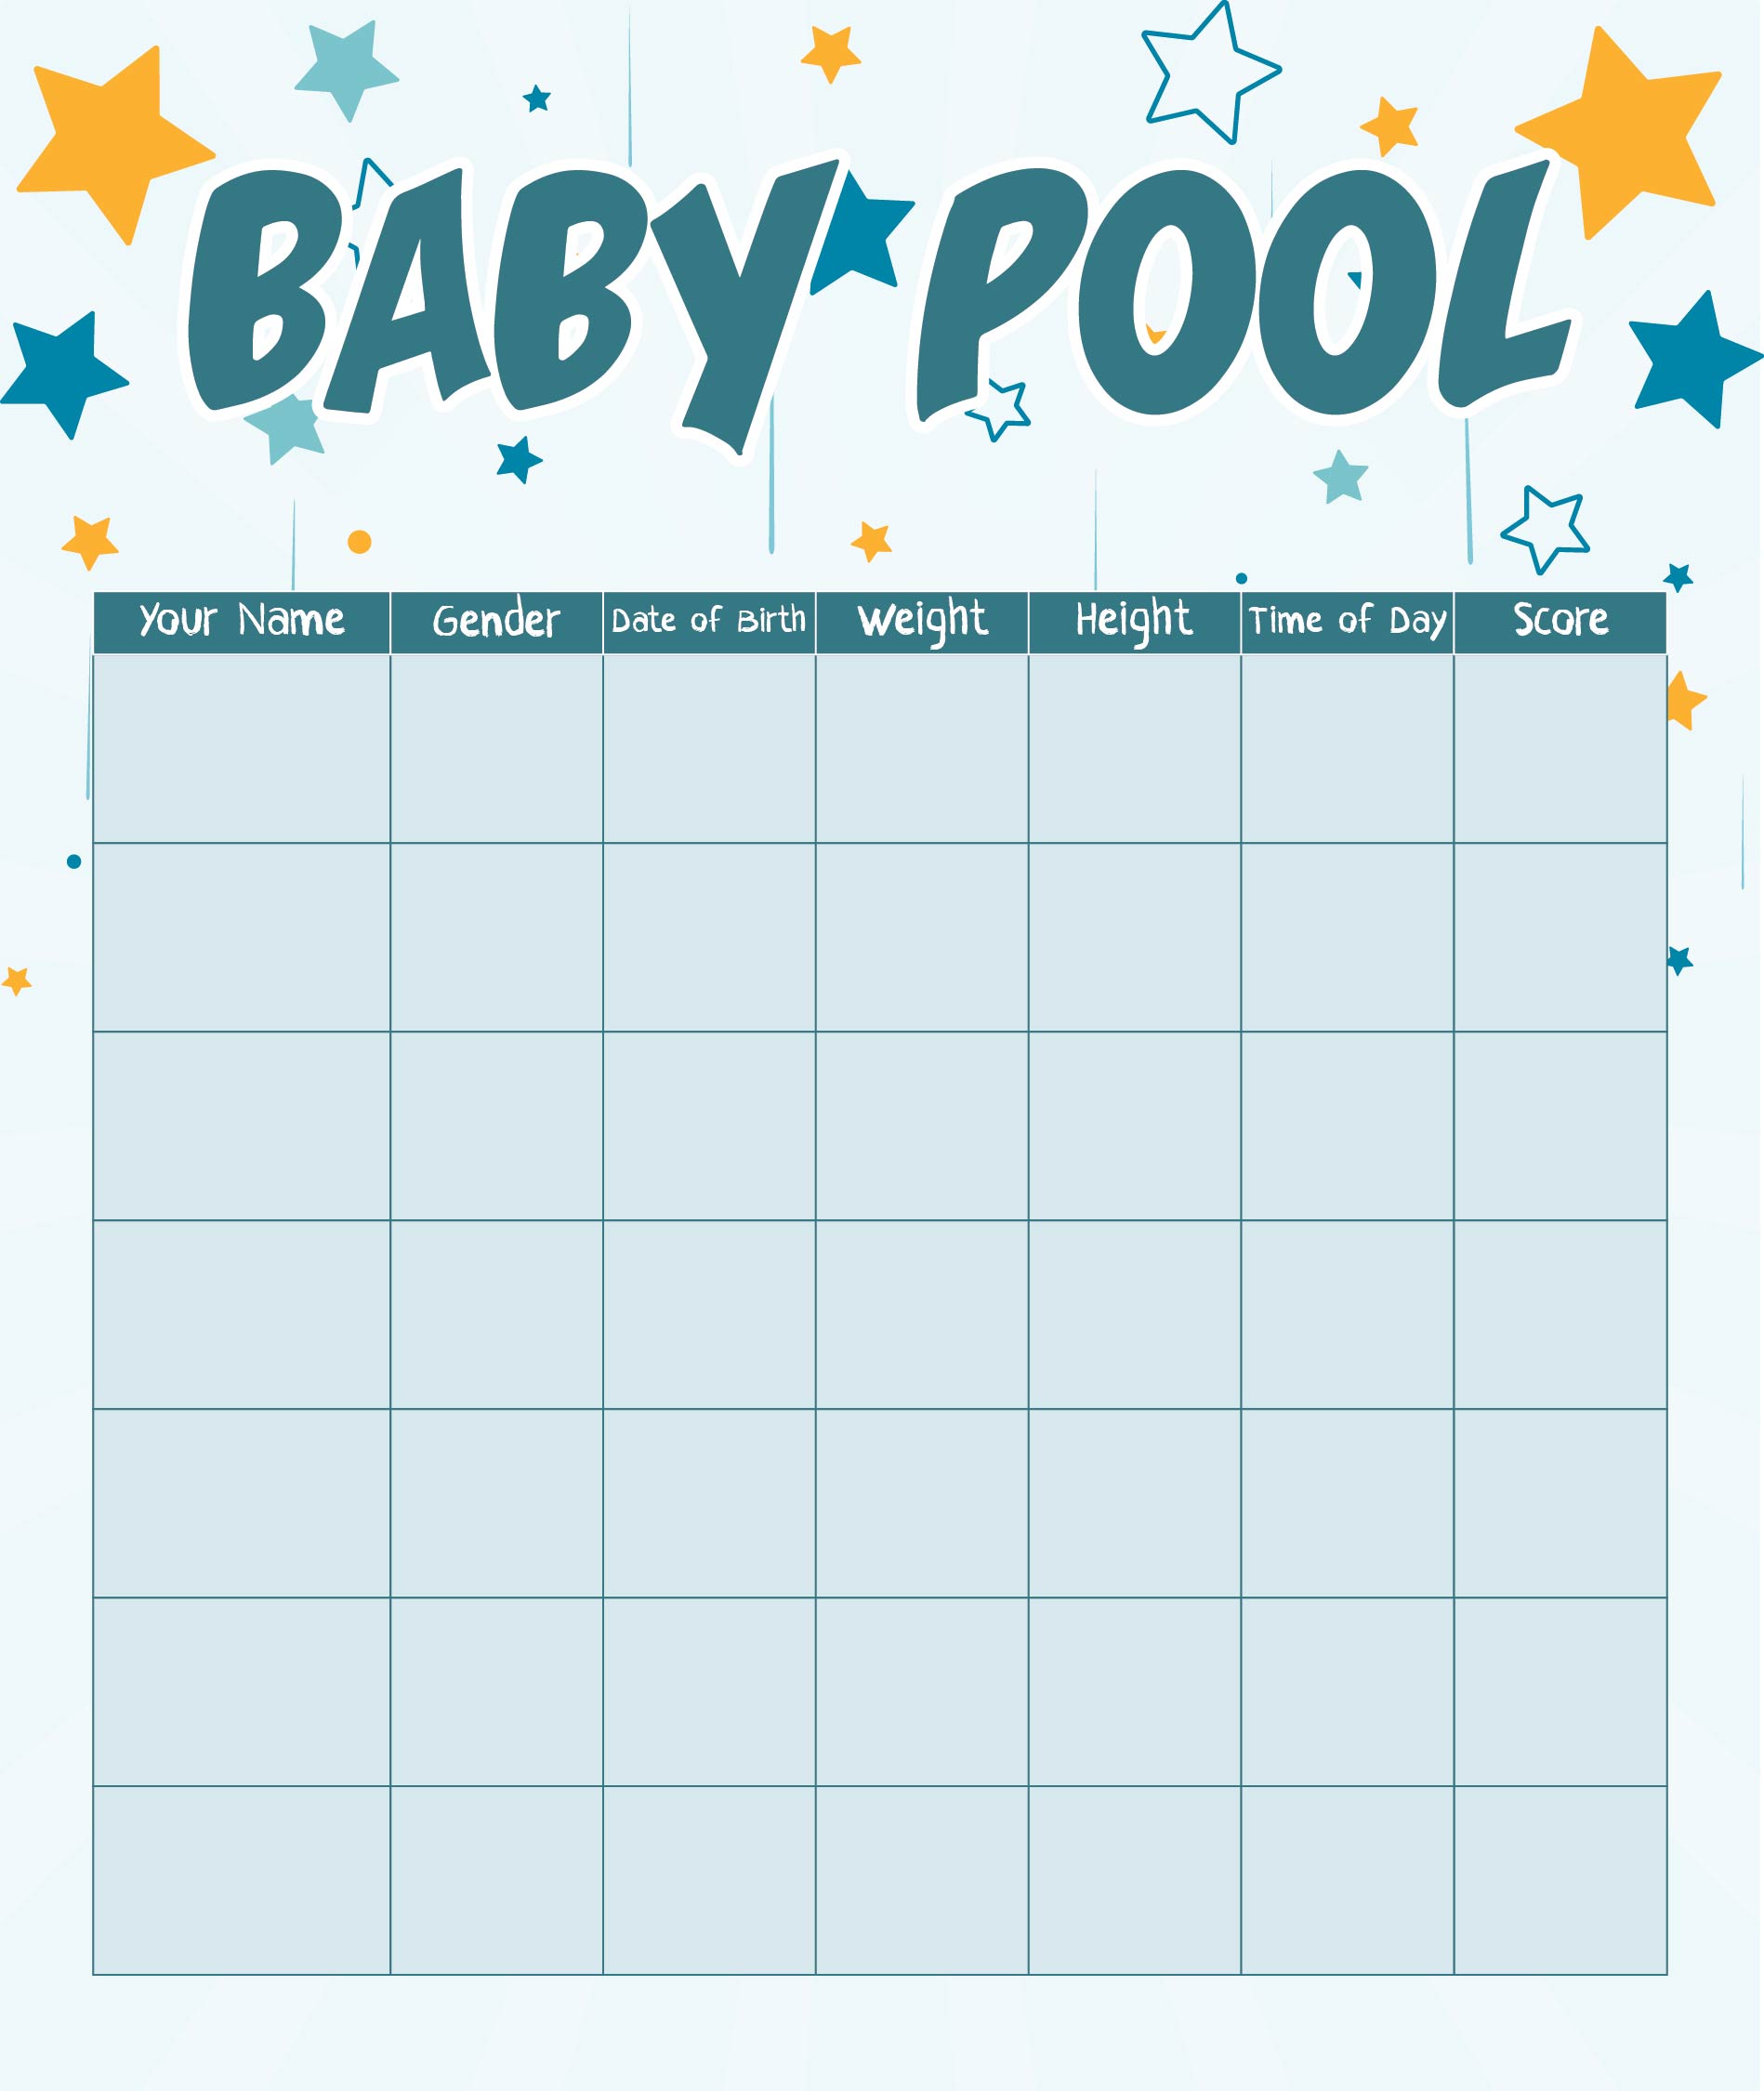 guess the baby weight and date template 30